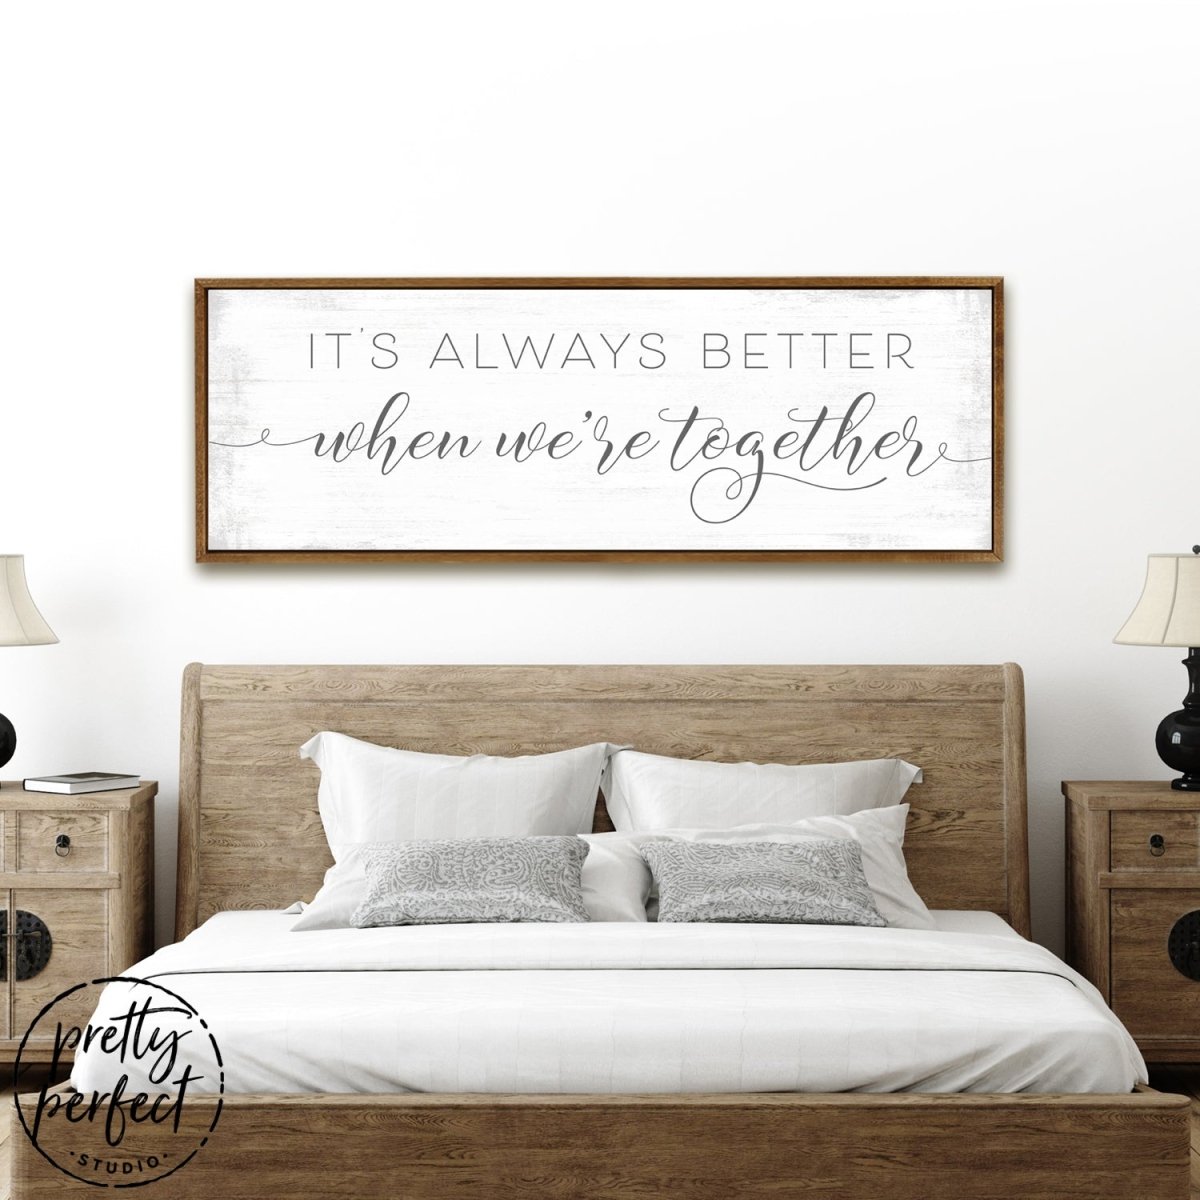 It's Always Better When We're Together Sign Above Bed - Pretty Perfect Studio